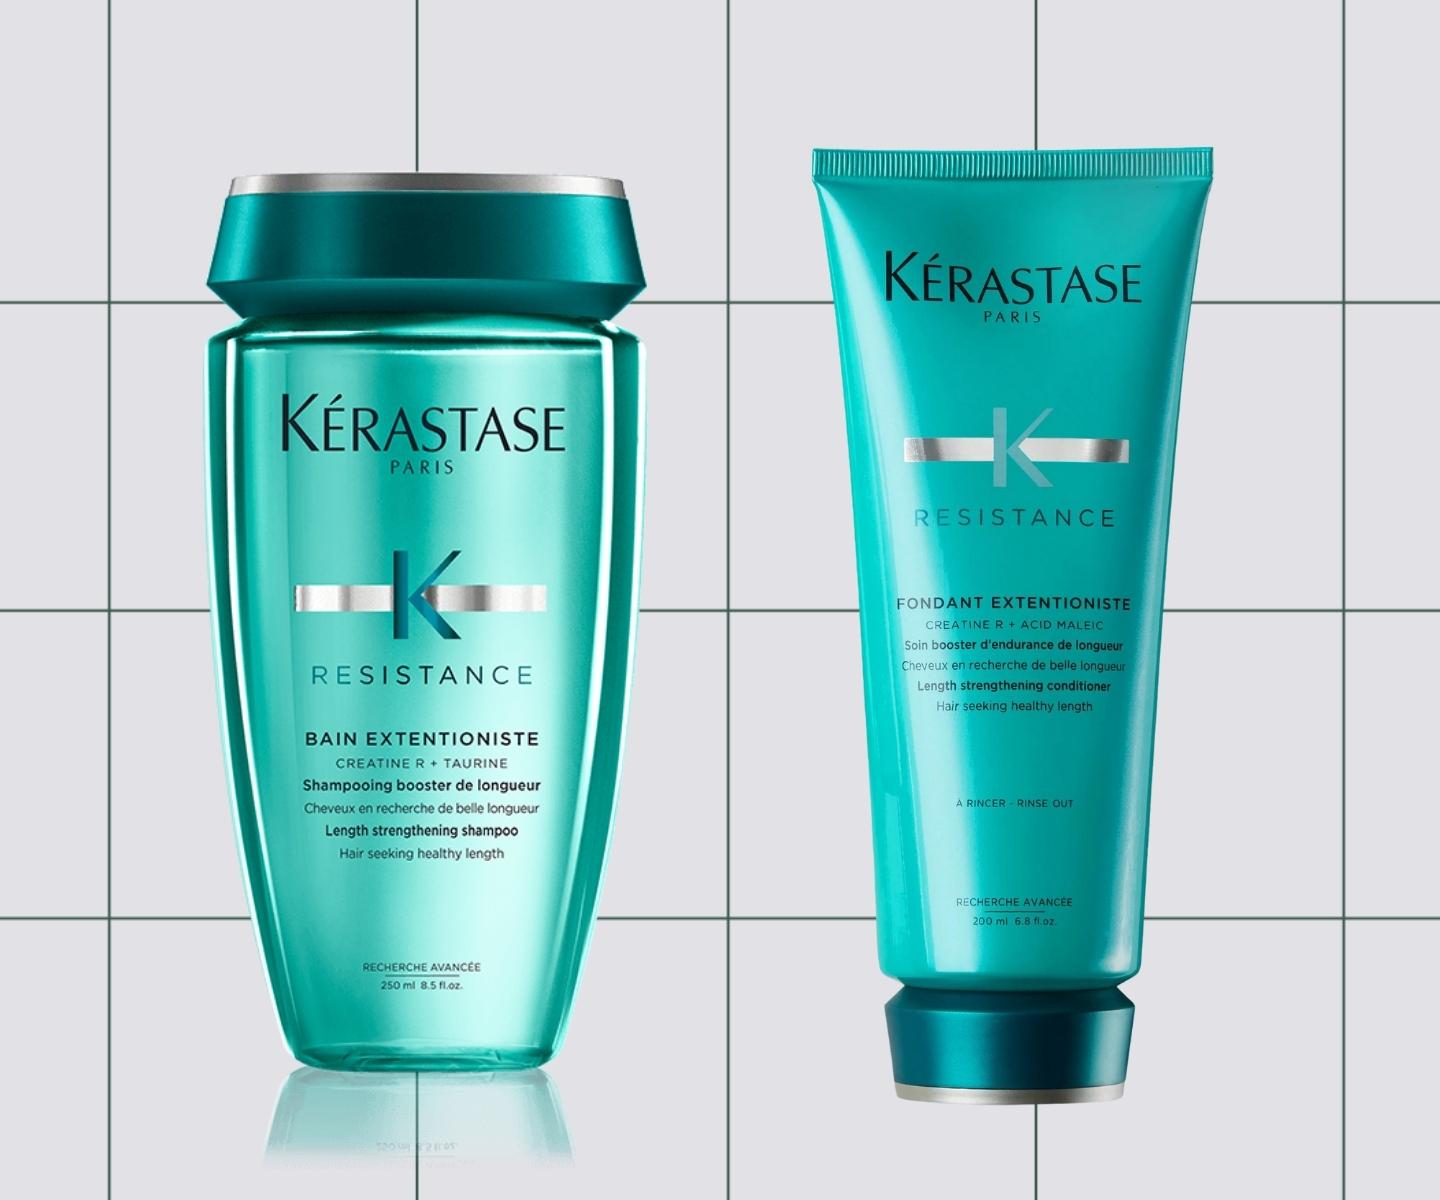 The Top Best-Selling Kérastase Hair Products on Adore Beauty Right Now